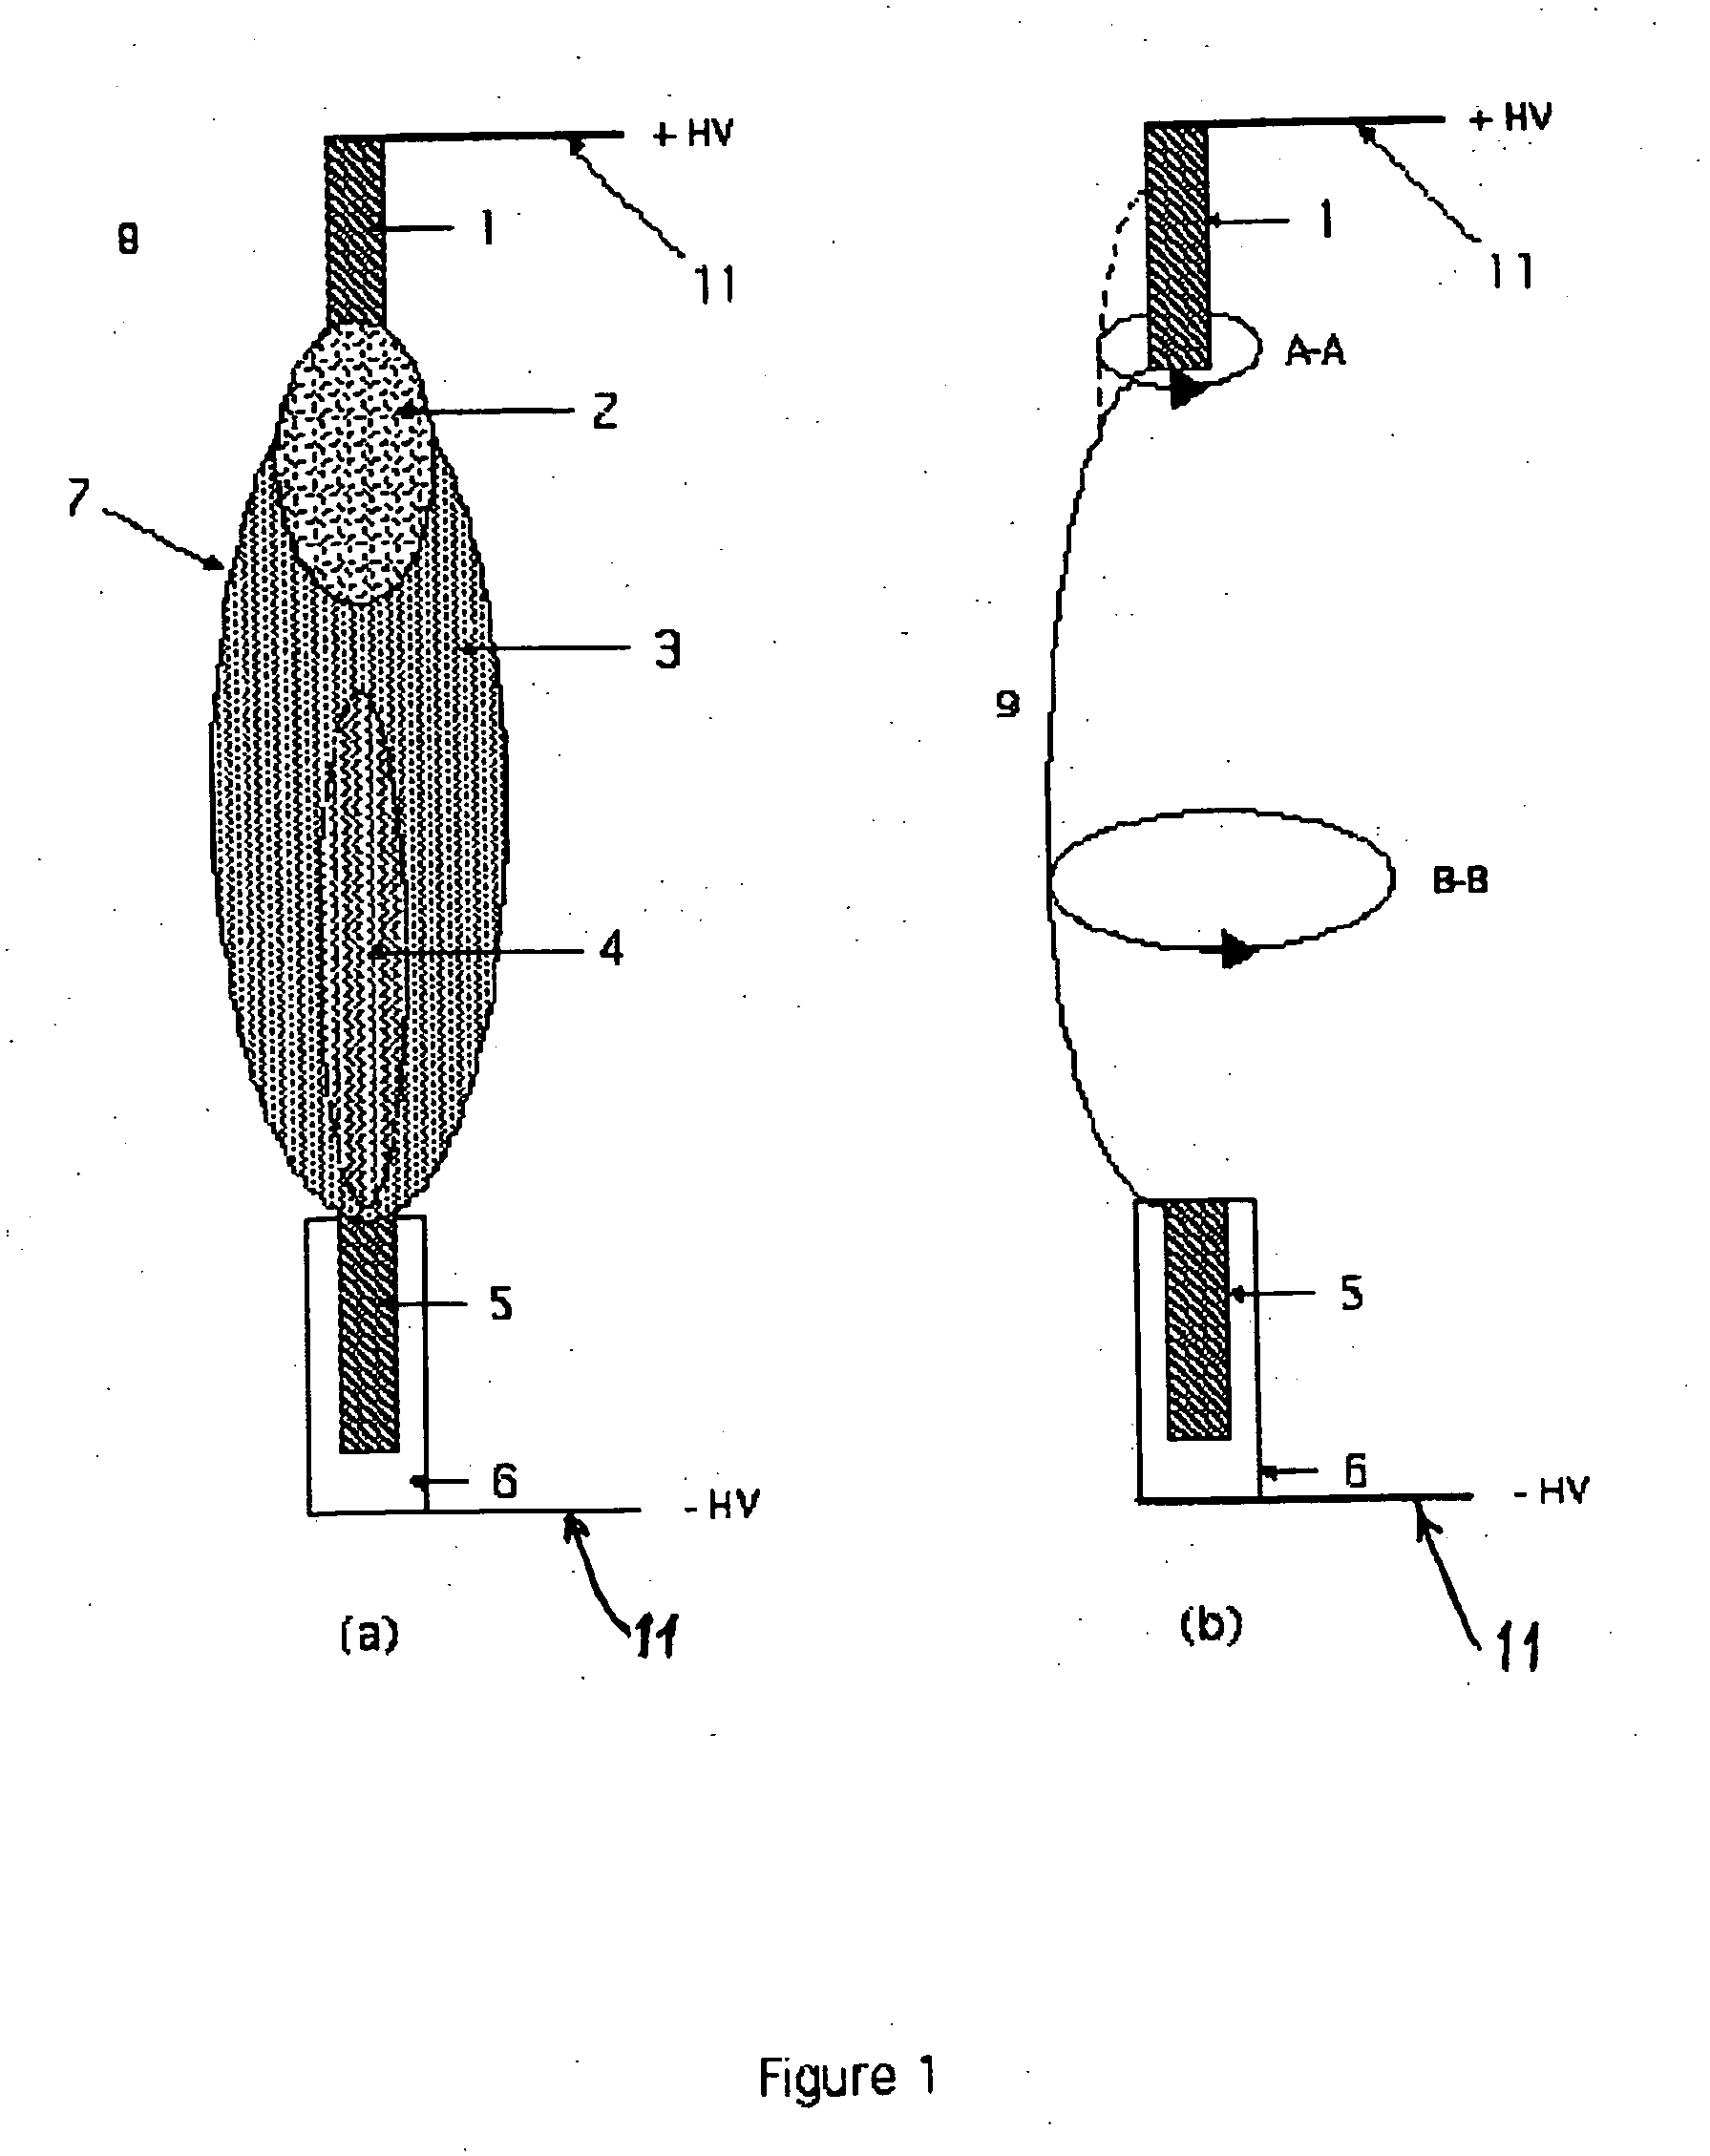 System, method, and apparatus for an intense ultraviolet radiation source